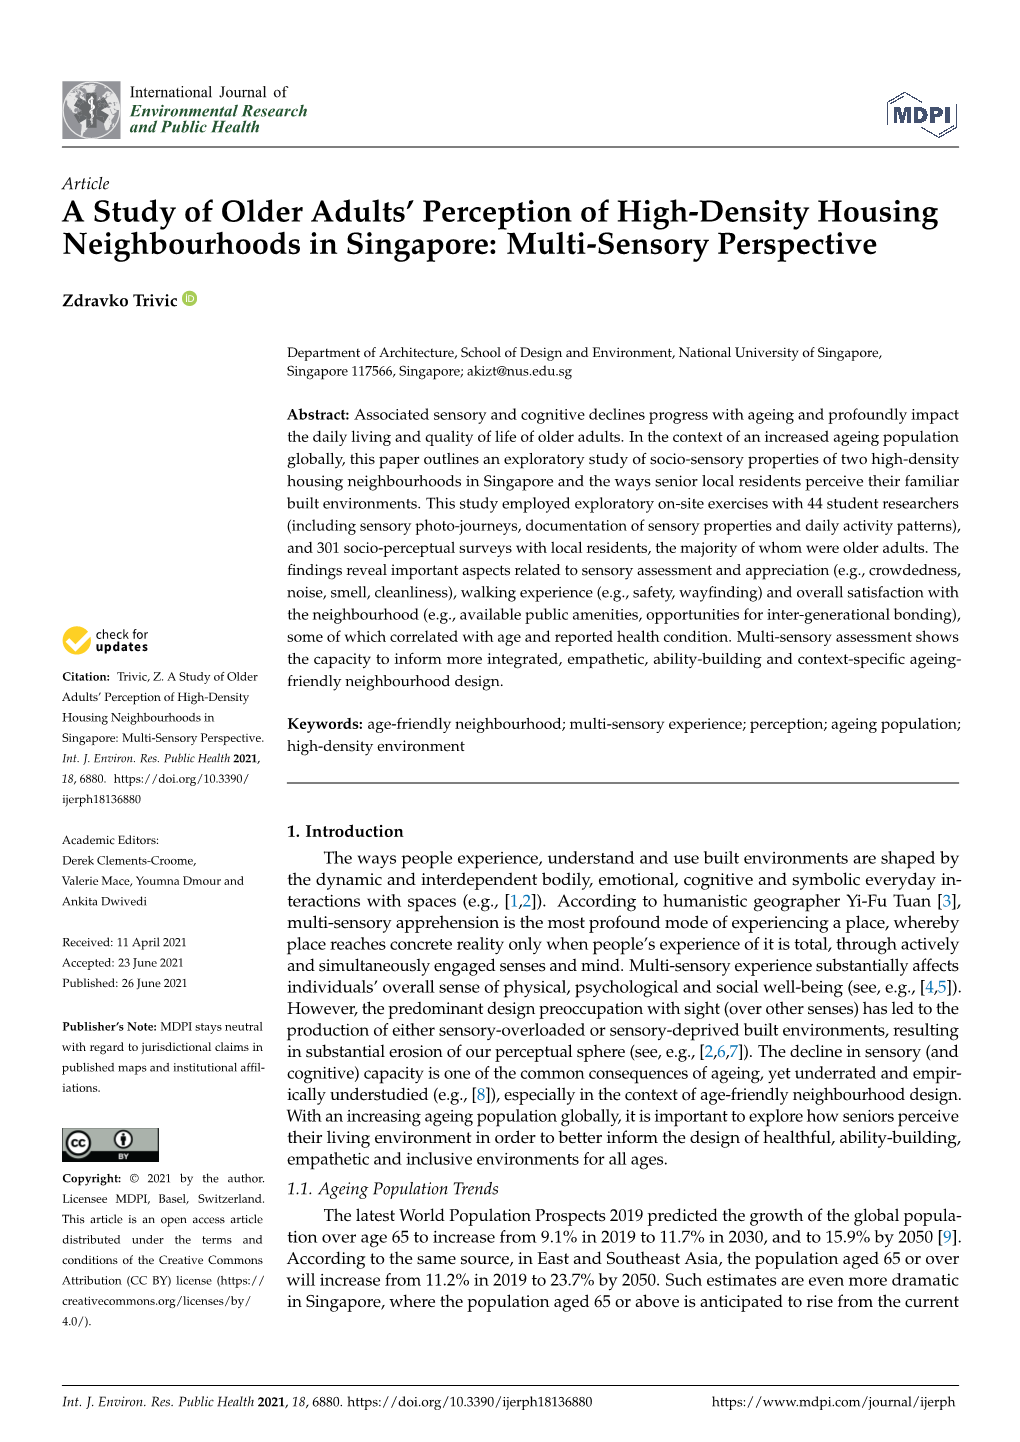 A Study of Older Adults' Perception of High-Density Housing Neighbourhoods in Singapore: Multi-Sensory Perspective